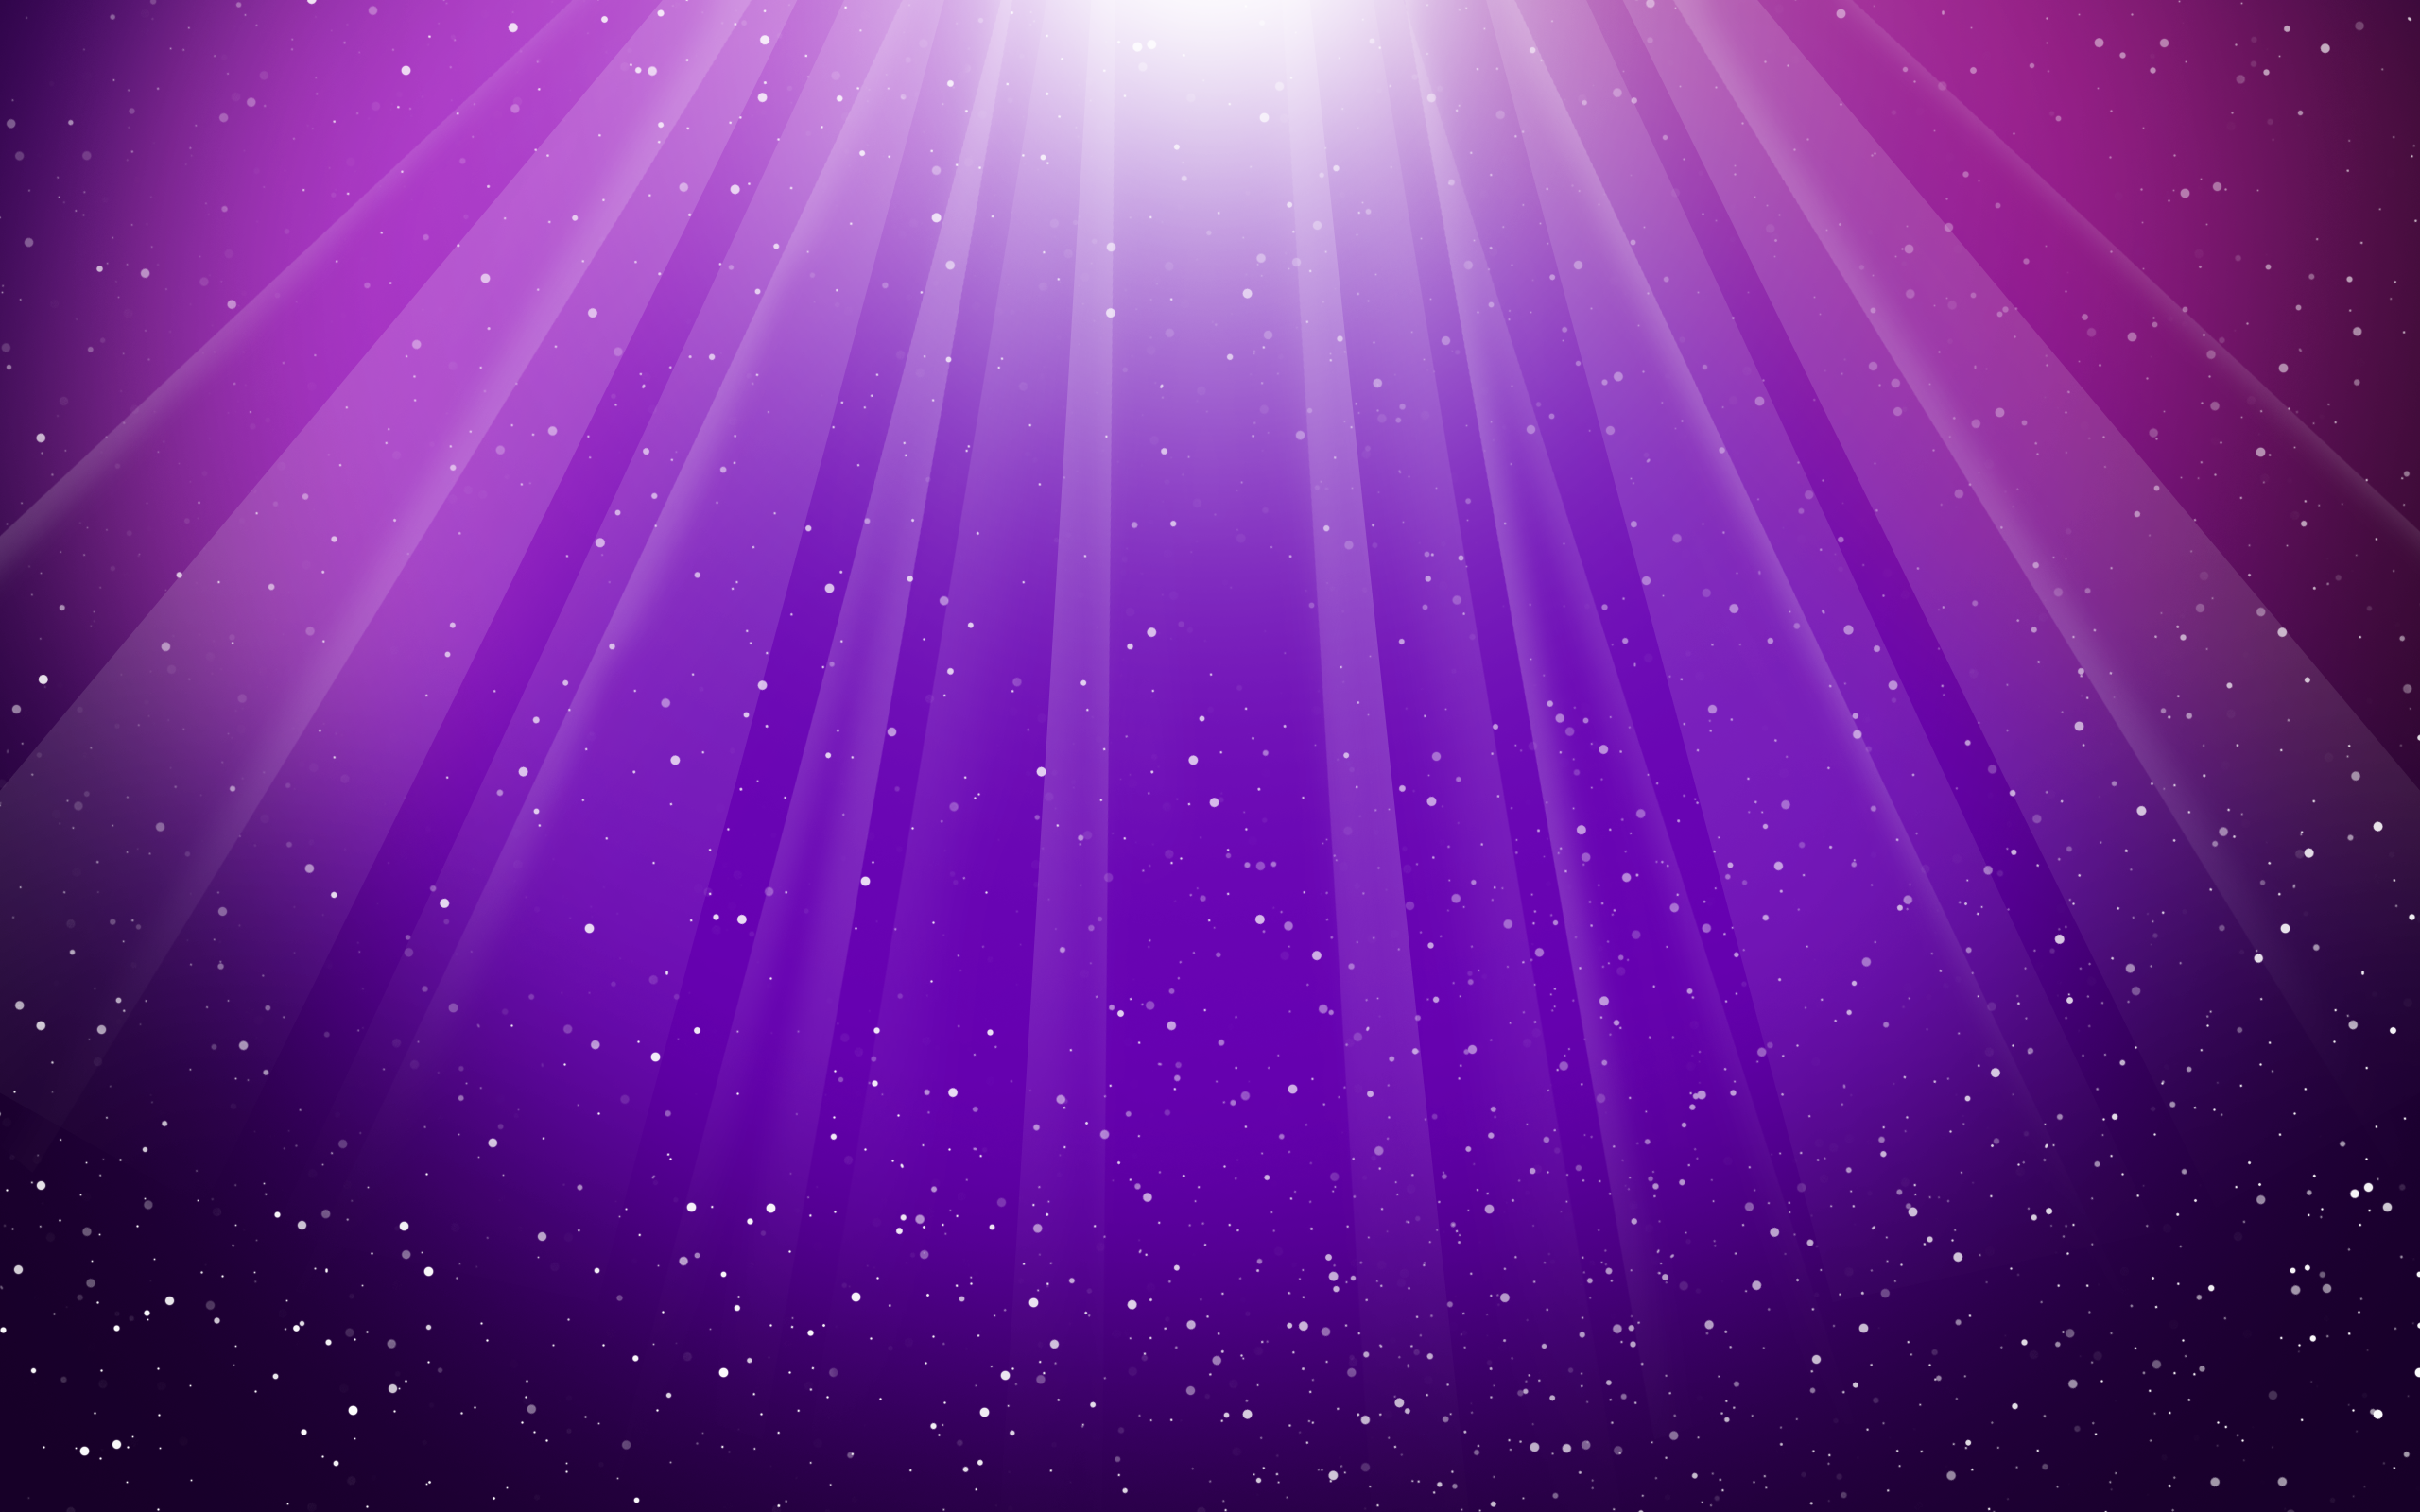 39 High Definition Purple Wallpaper Images for Download 2560x1600